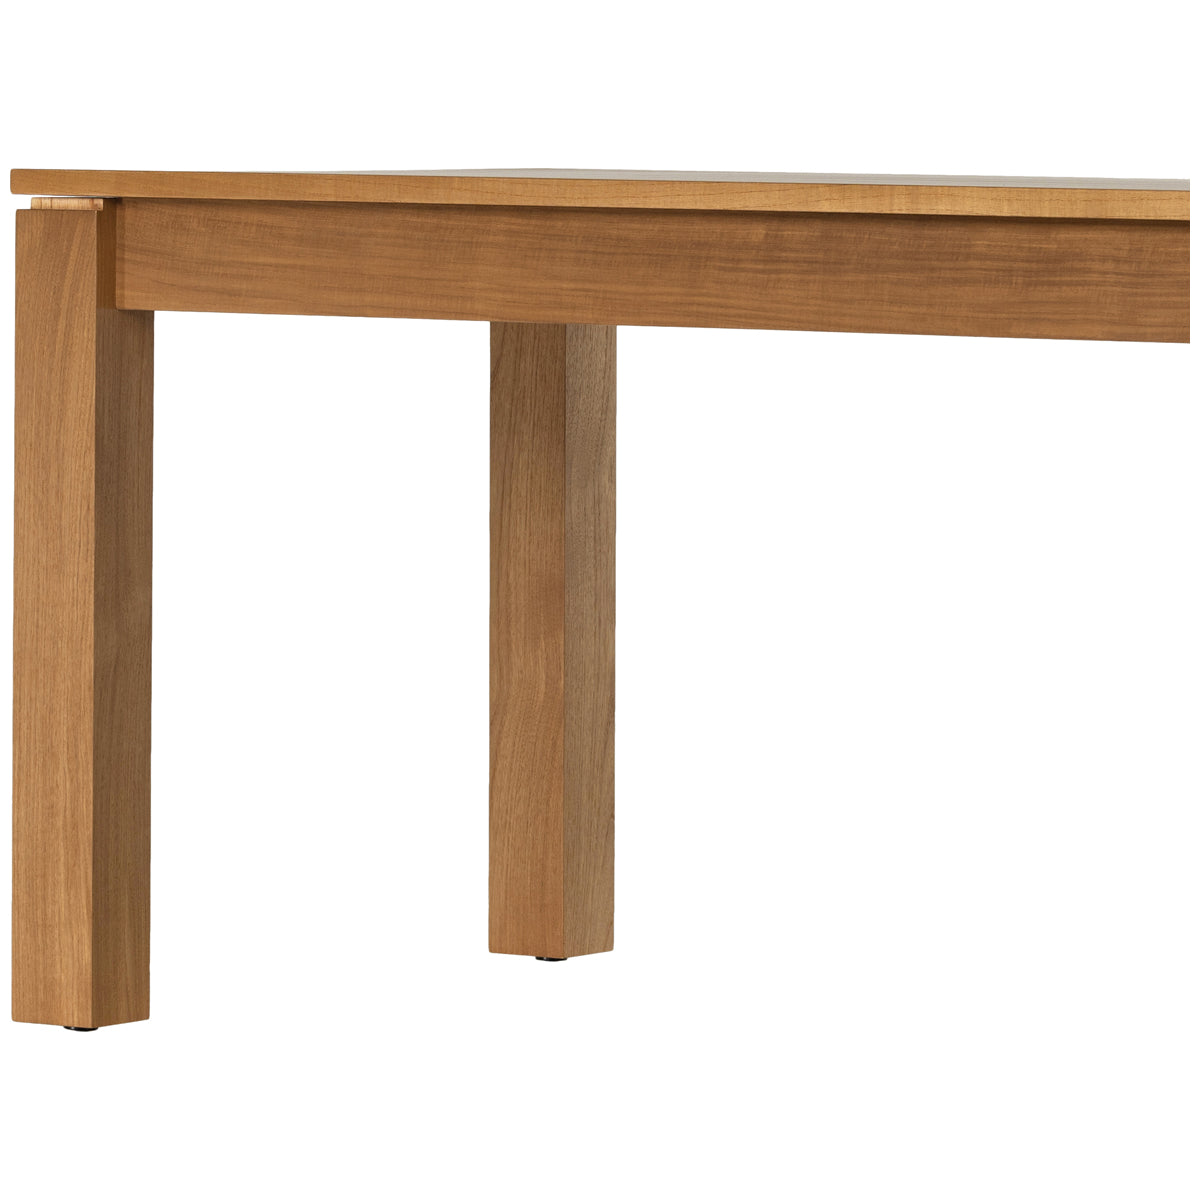 Four Hands Crowley Timur Dining Table